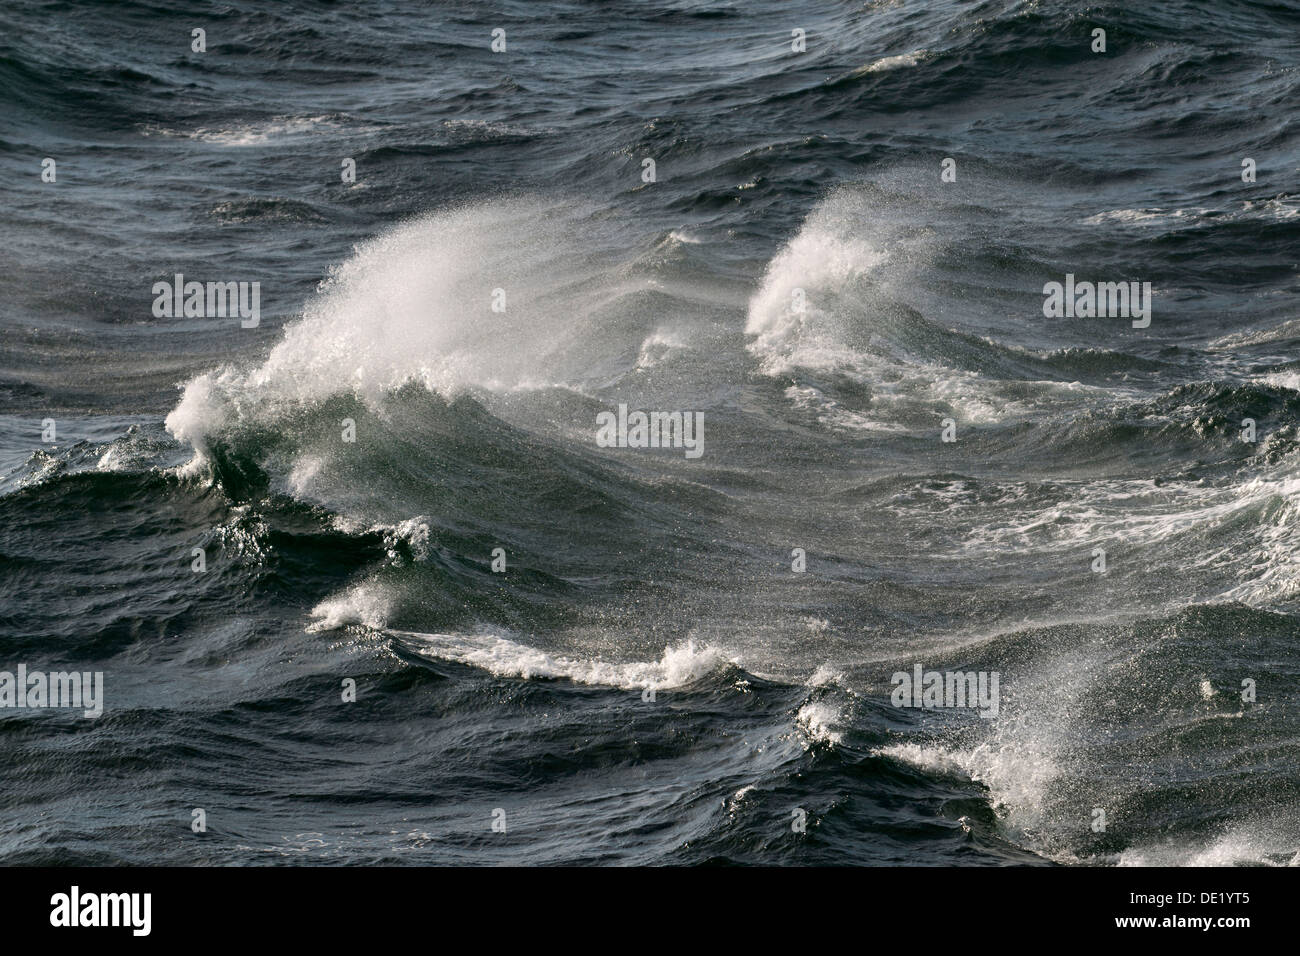 Waves with spray, on the high seas, Baltic Sea, Germany Stock Photo